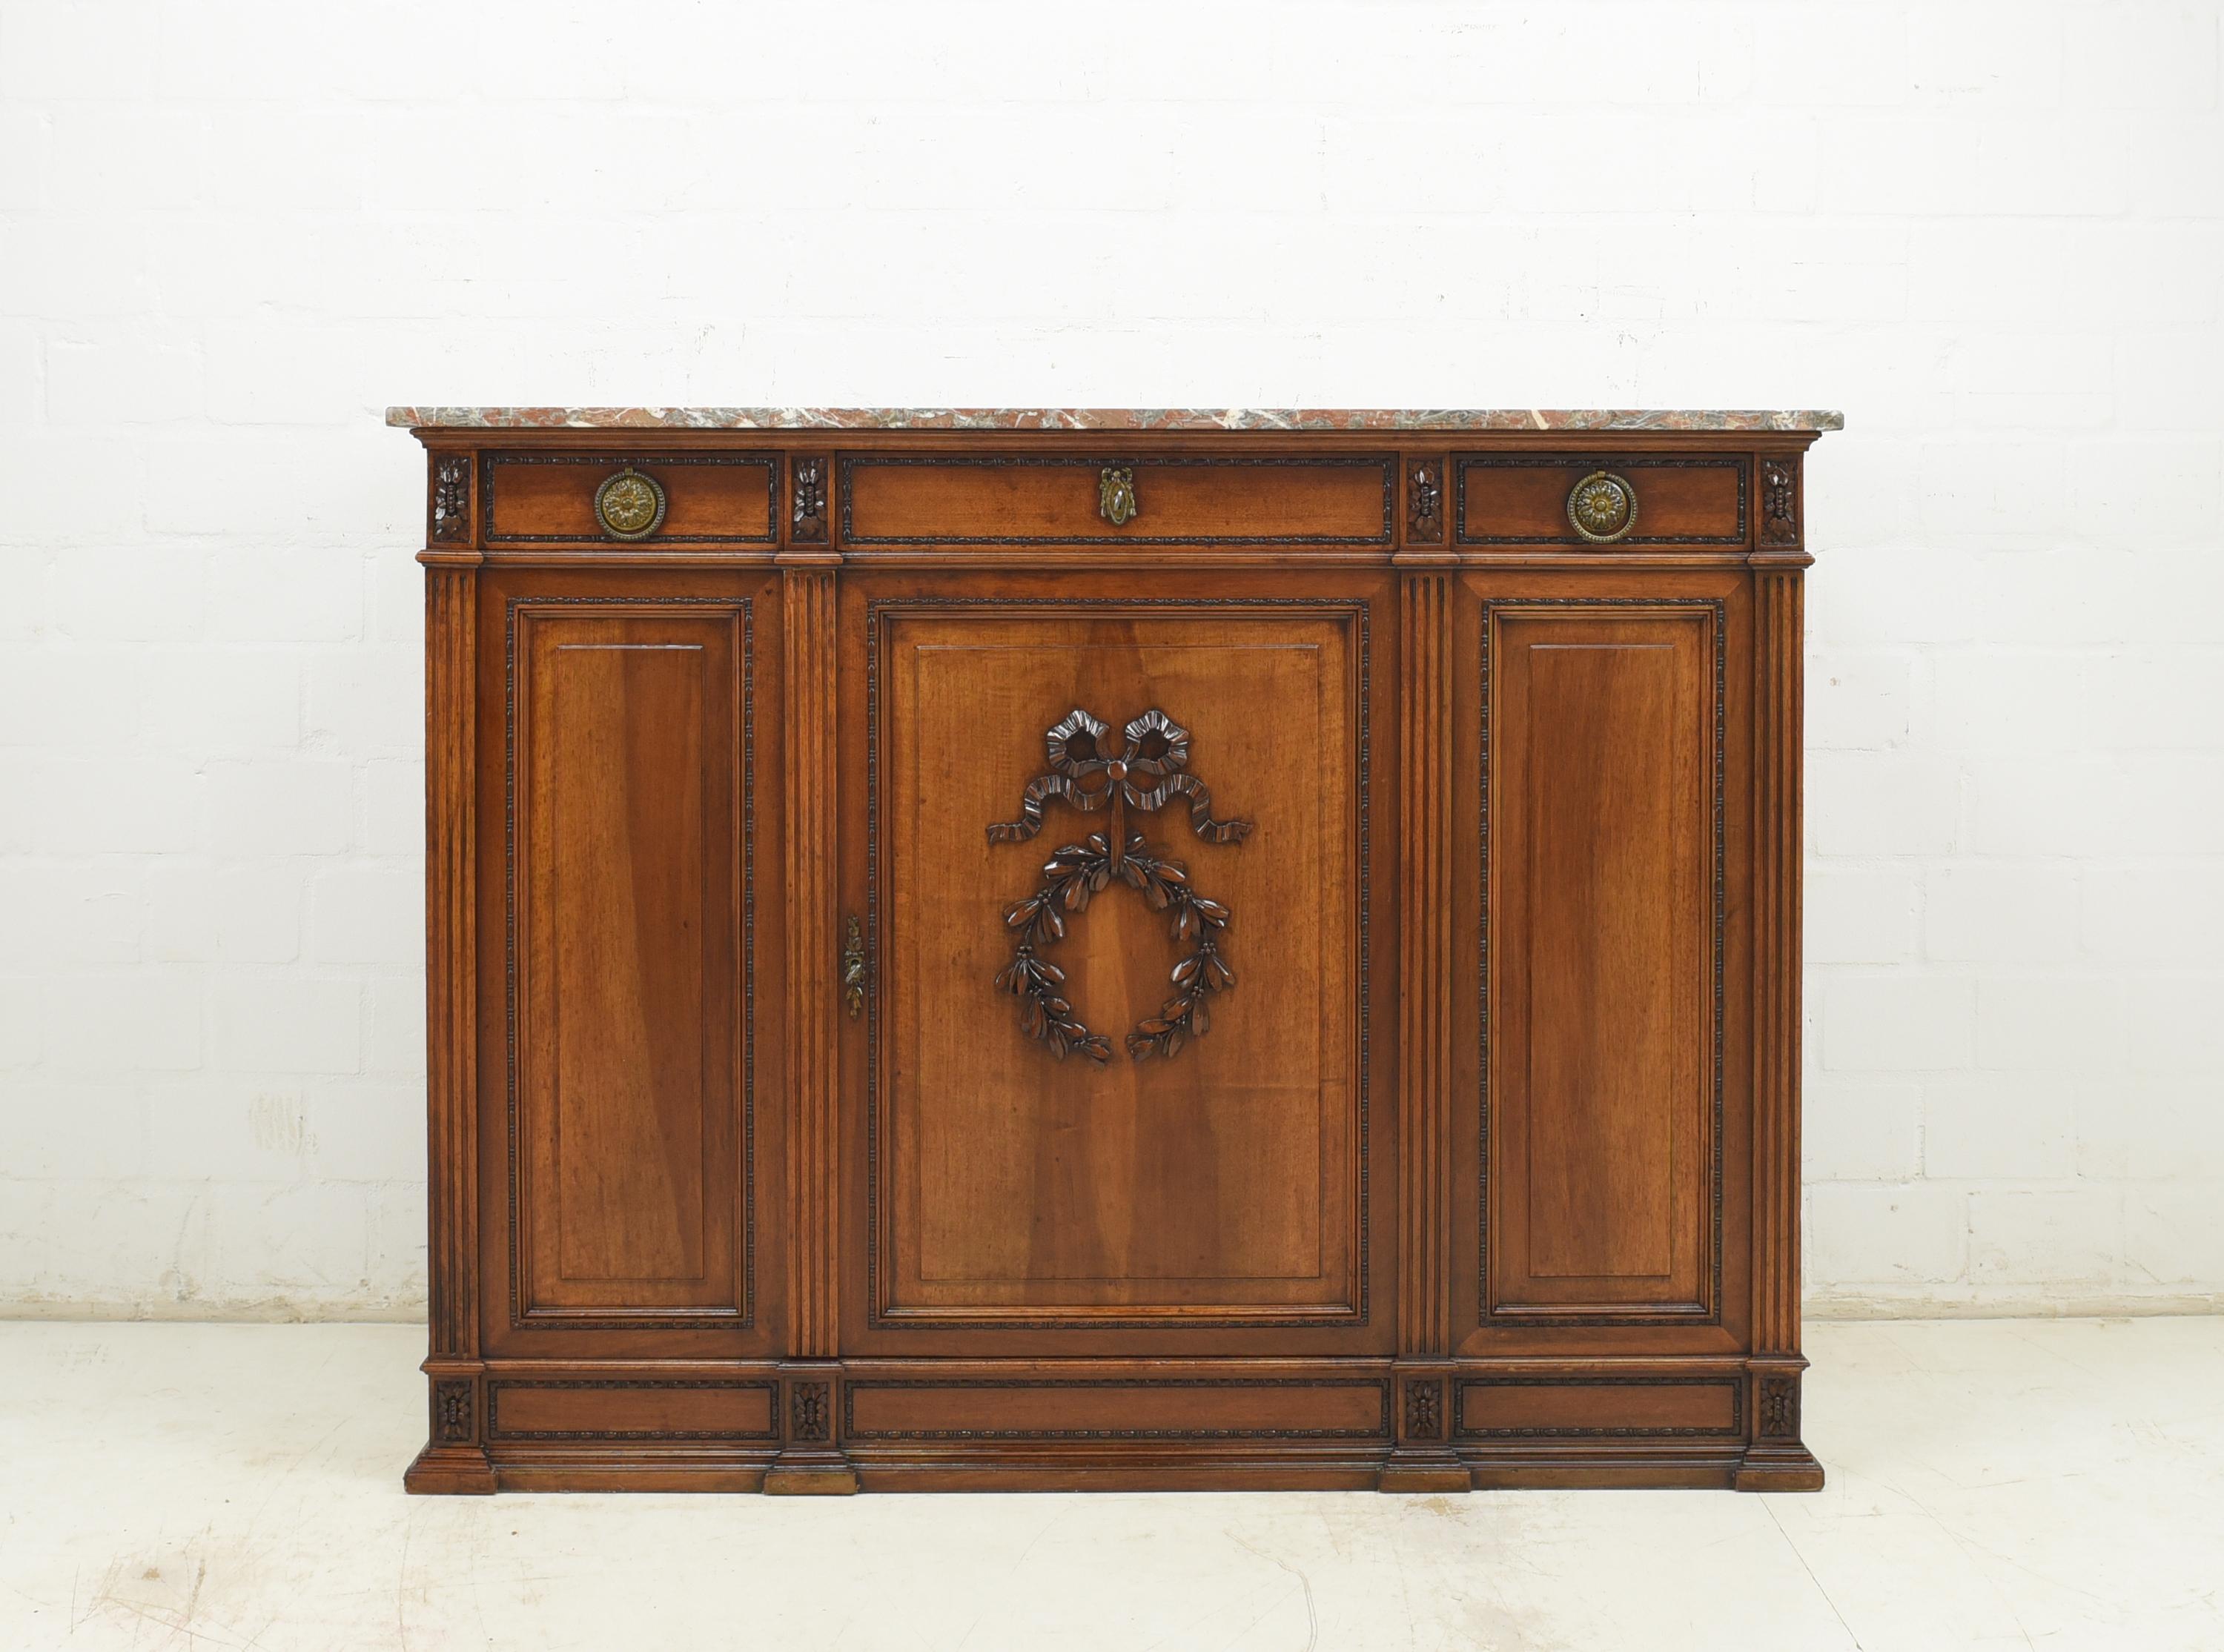 Dresser restored walnut historicism around 1900 sideboard chest of drawers

Features: 
Single-door model with three drawers
High quality
Drawers pronged
Beautiful carved decor
Original fittings
Original stone slab
Beautiful walnut